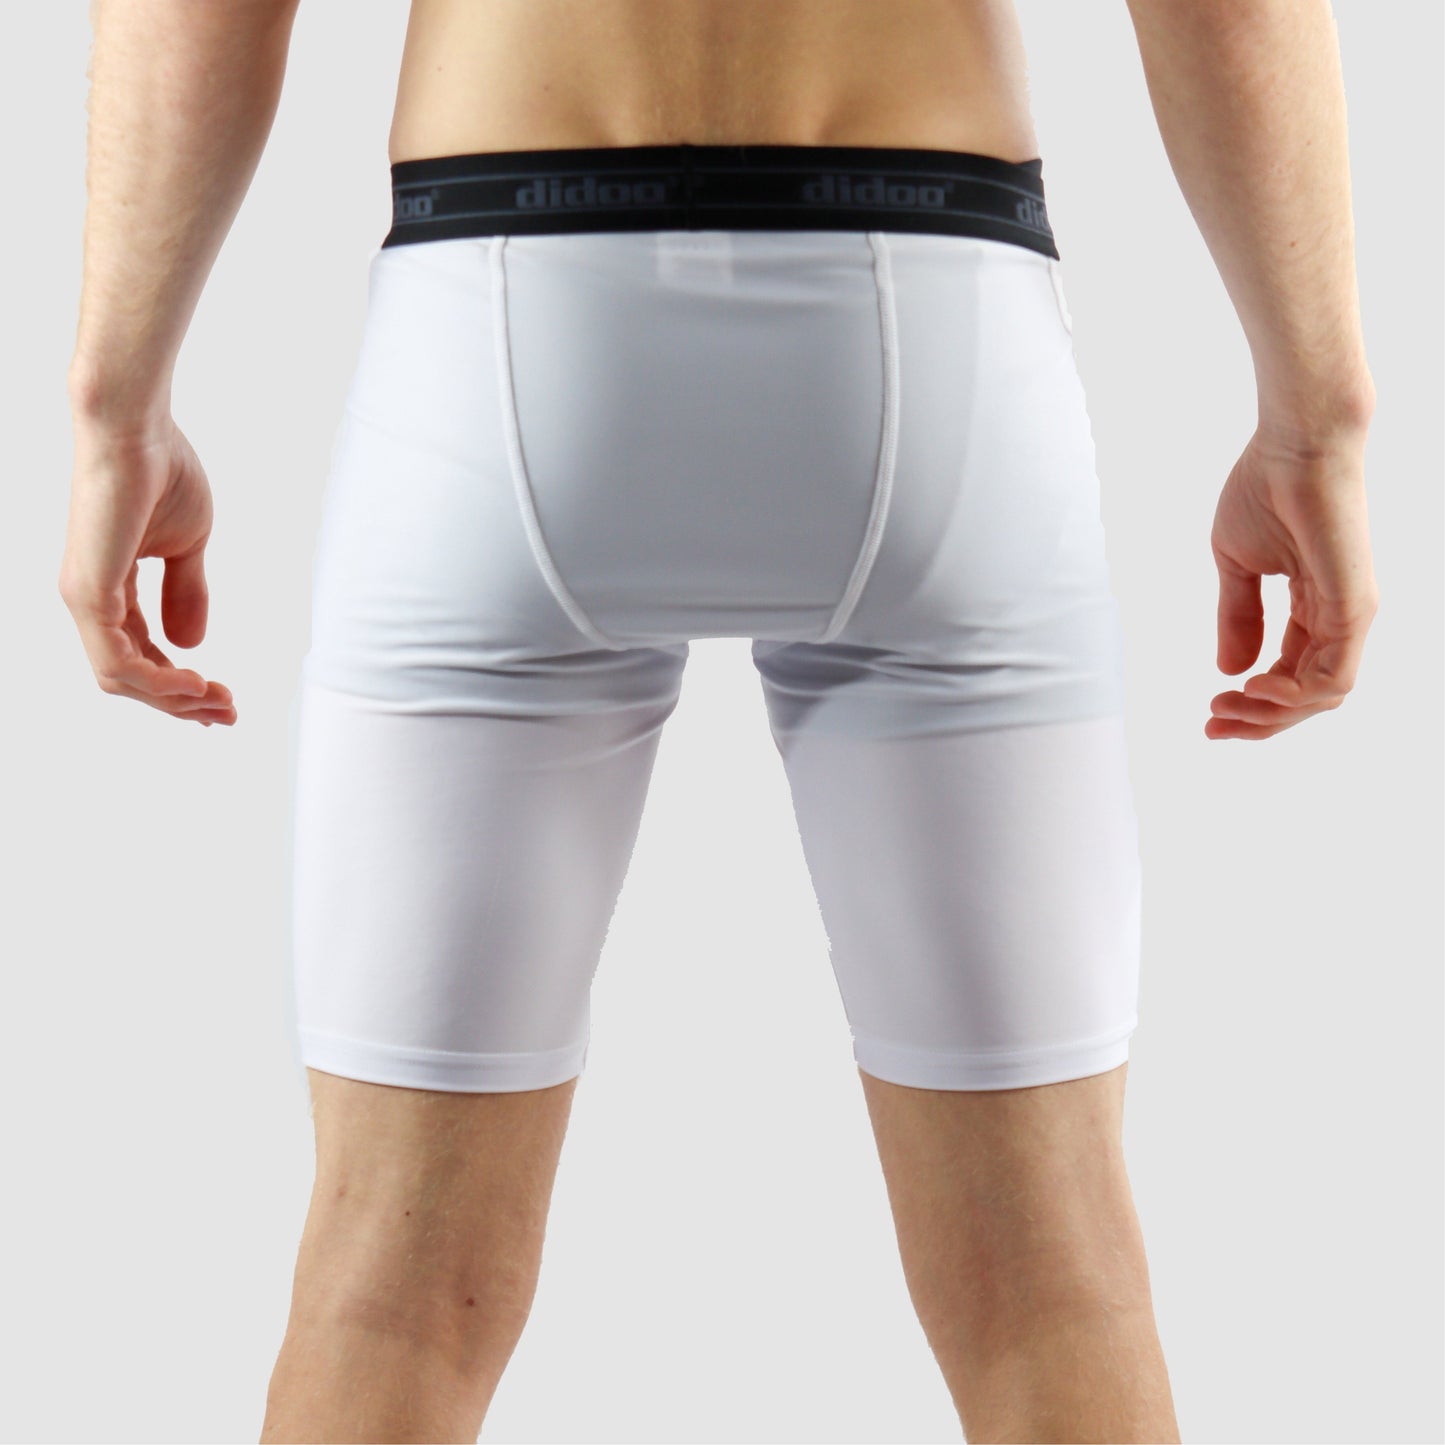 DiDOO Men's Compression Base Layer Shorts